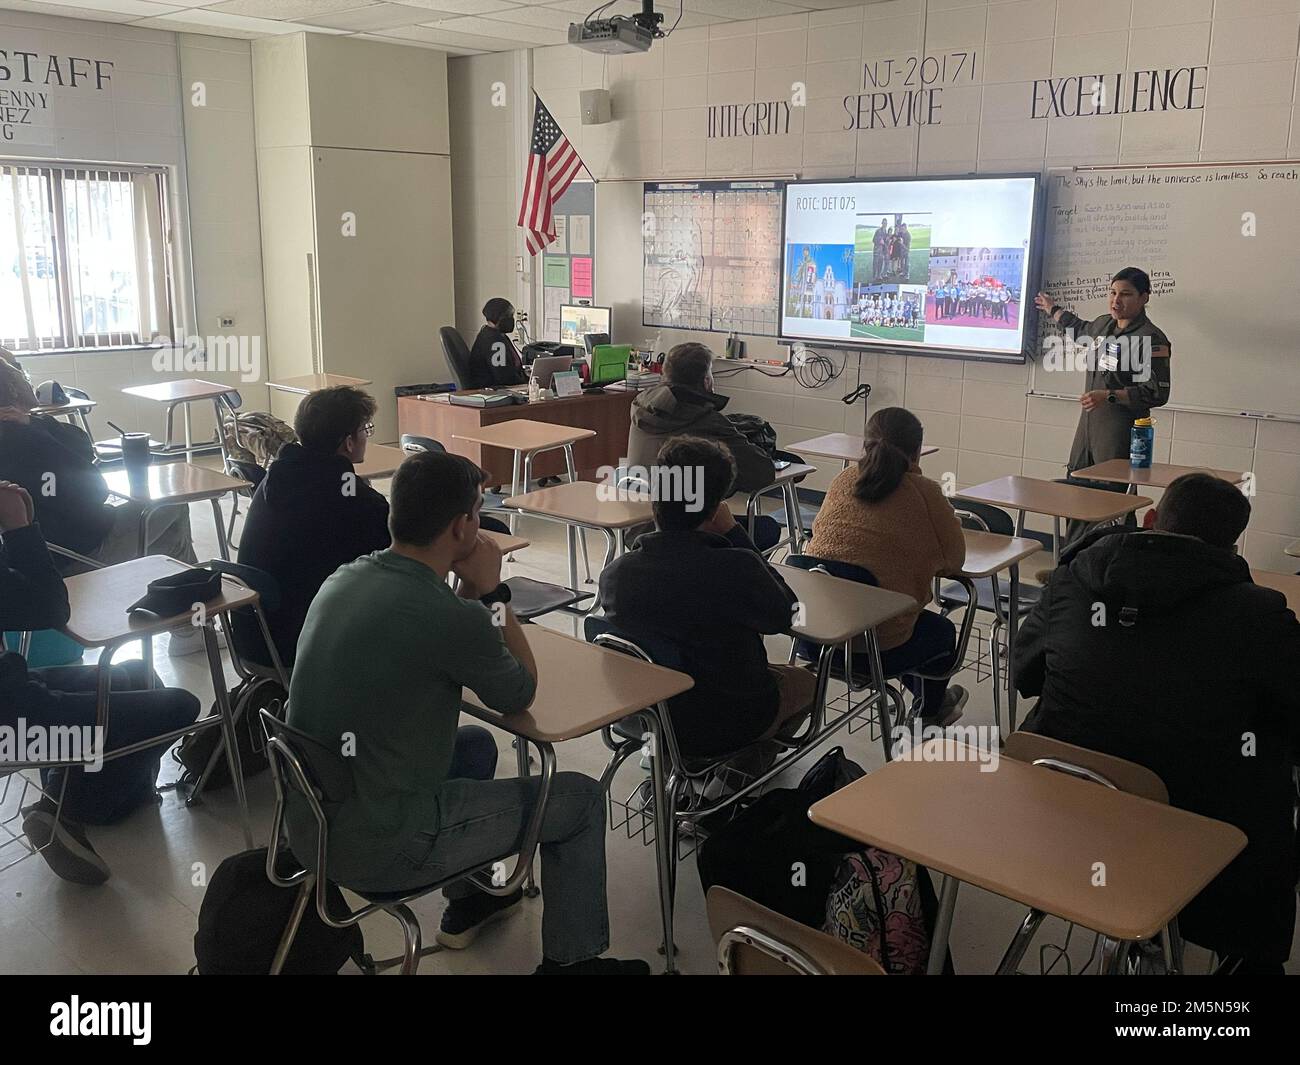 U.S. Air Force Capt. Irlanda Rodriguez from the 6th Airlift Squadron gives a presentation to level 300 and level 400 JROTC students on AIM High, North Burlington High school, New Jersey, Mar. 28, 2022. AIM Hight is an AFRS Detachment 1 mission geared towards informing, influencing, and inspiring tomorrow’s leaders through innovative outreach opportunities. Stock Photo